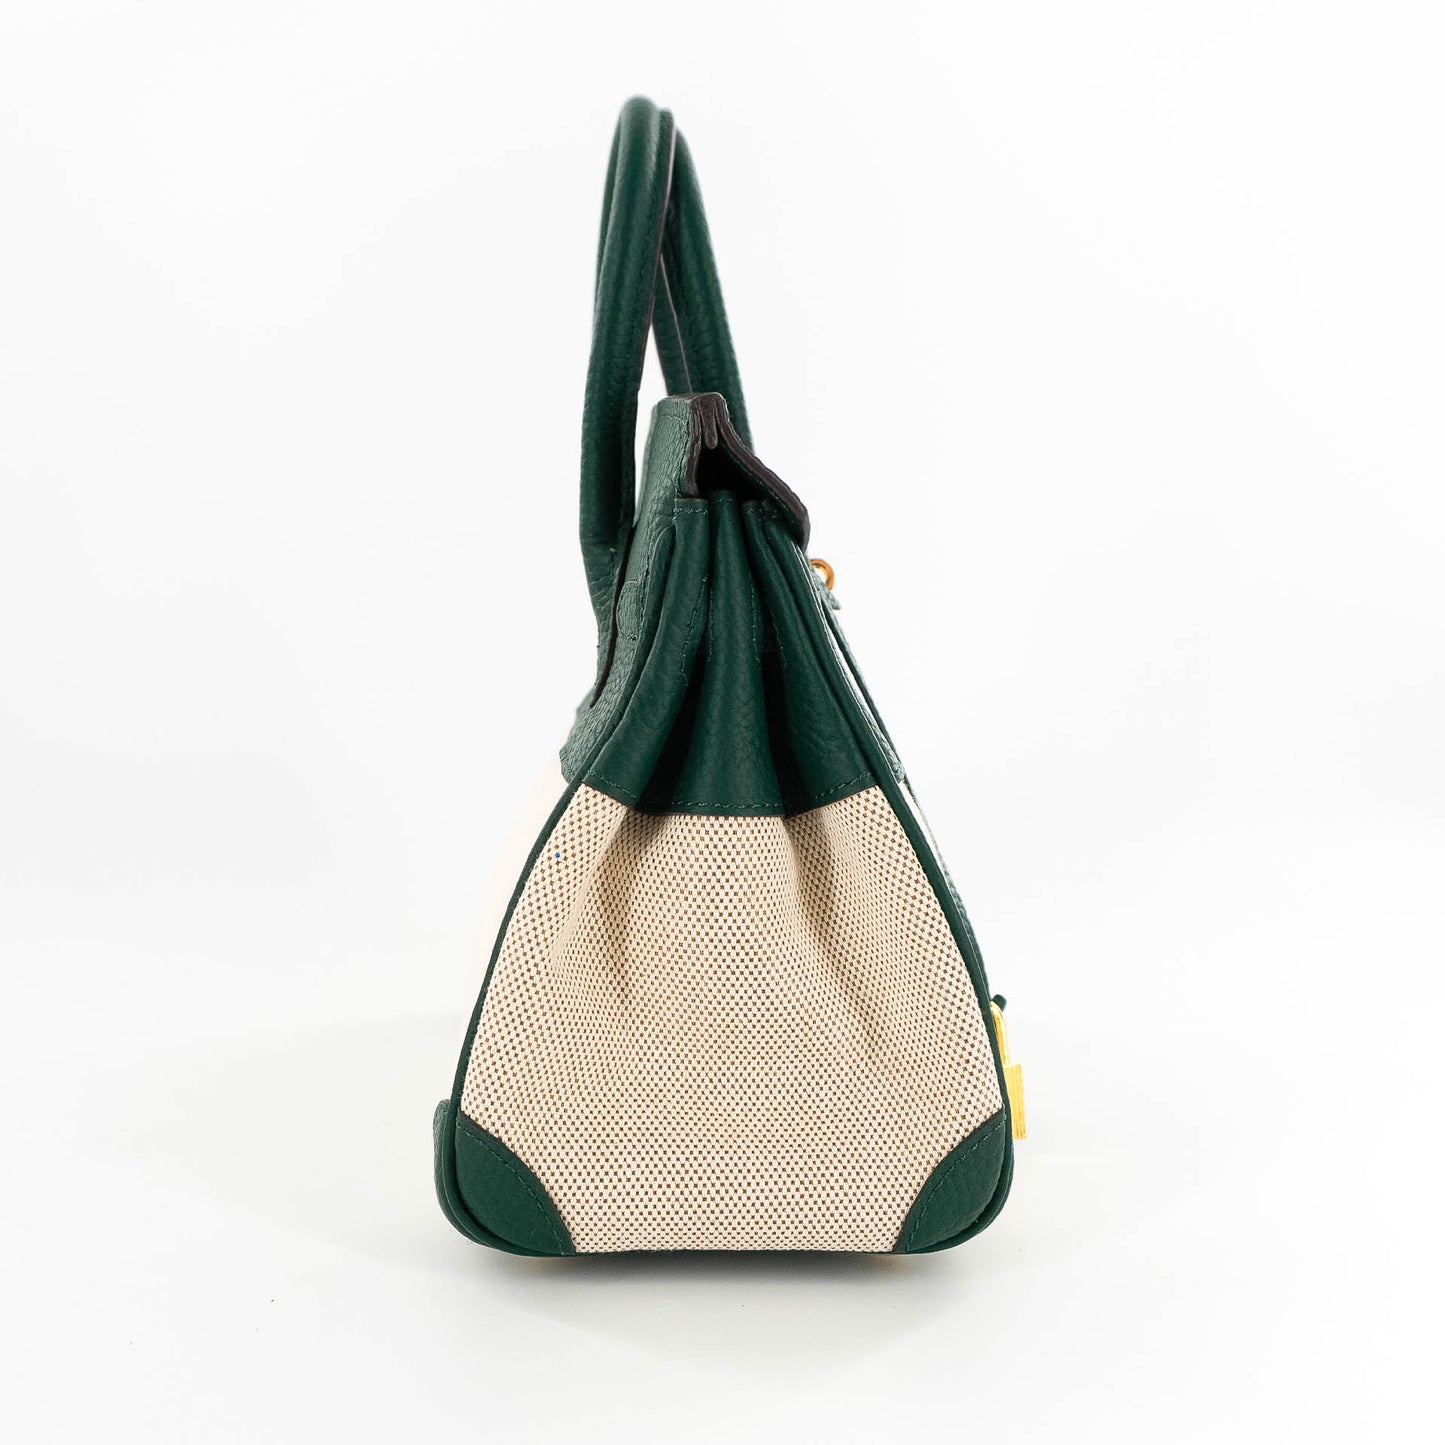 Duchess Handbag in Canvas and Green Leather